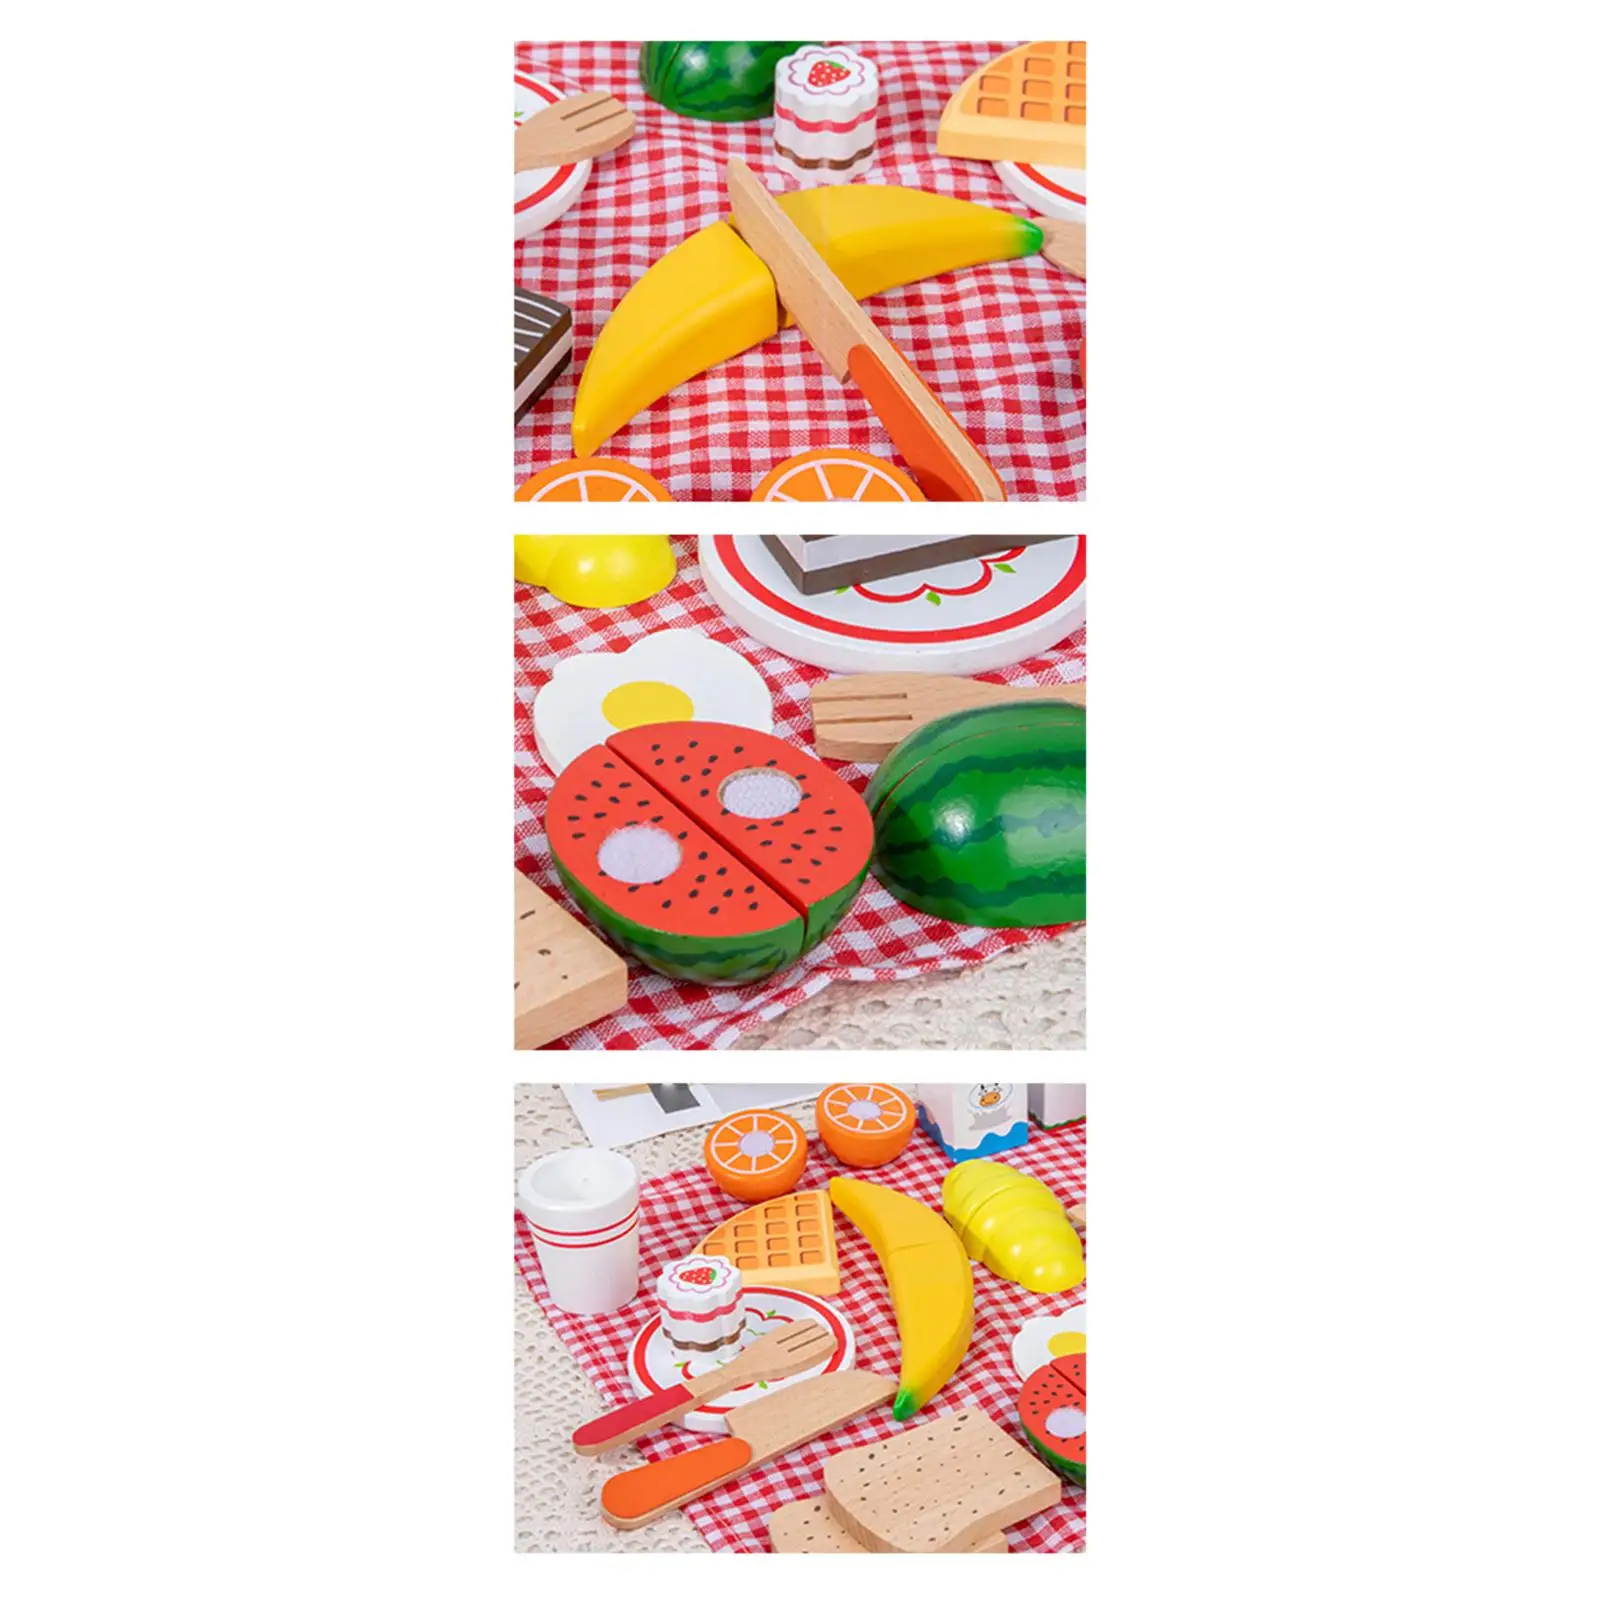 Cut Vegetable Cooking Game Set Kitchen Cutting Fruits Toys Cutting Fruits Play Set for Boys Girls